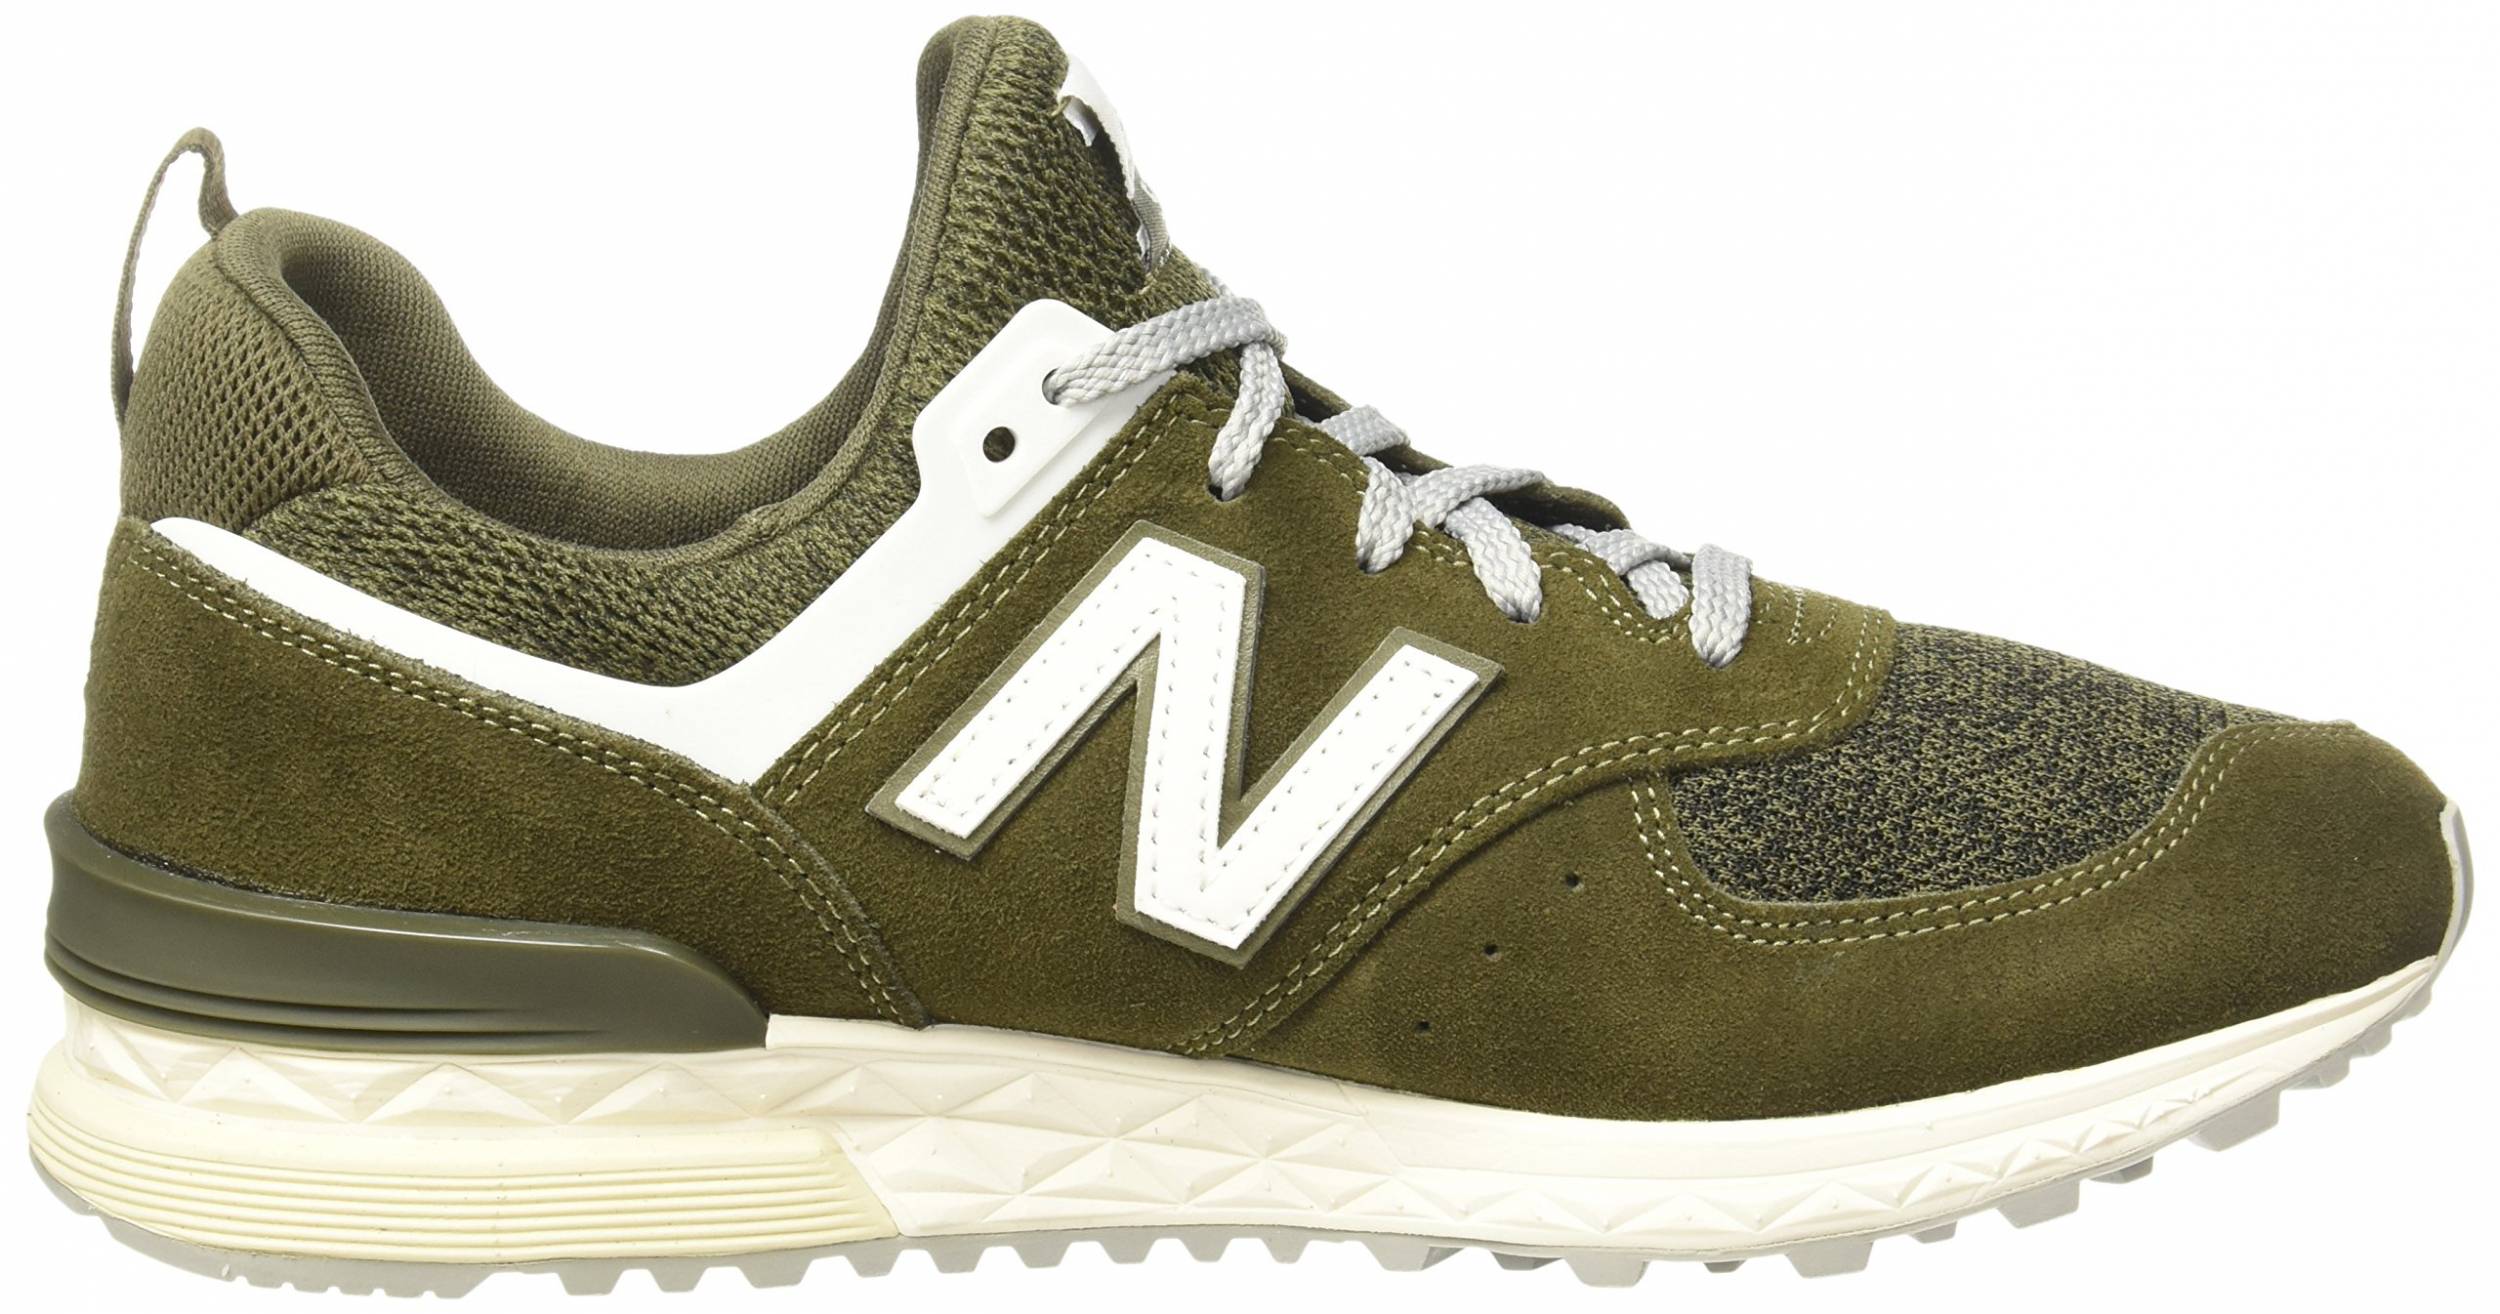 New Balance 574 Sport sneakers in 20+ colors (only $44) | RunRepeat